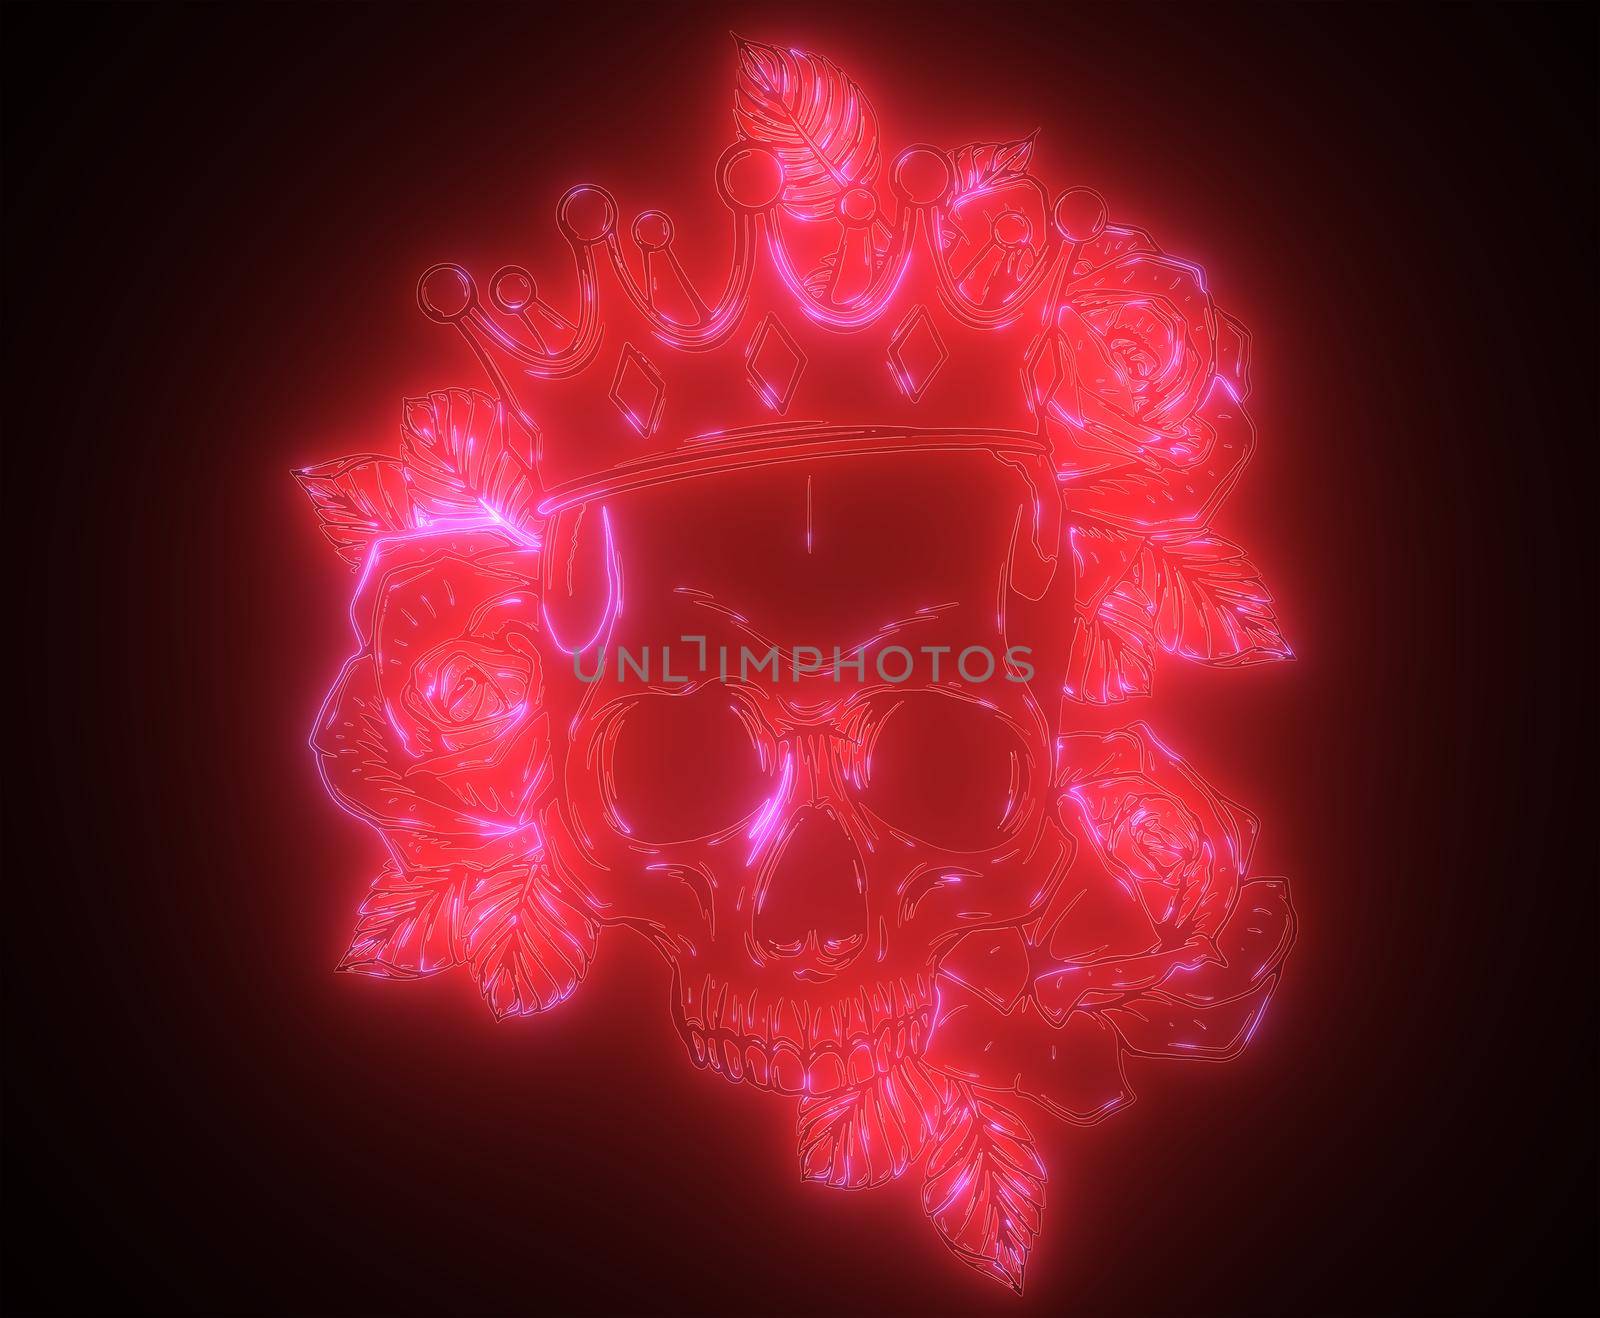 Glowing linear skull with red luminous roses by dean